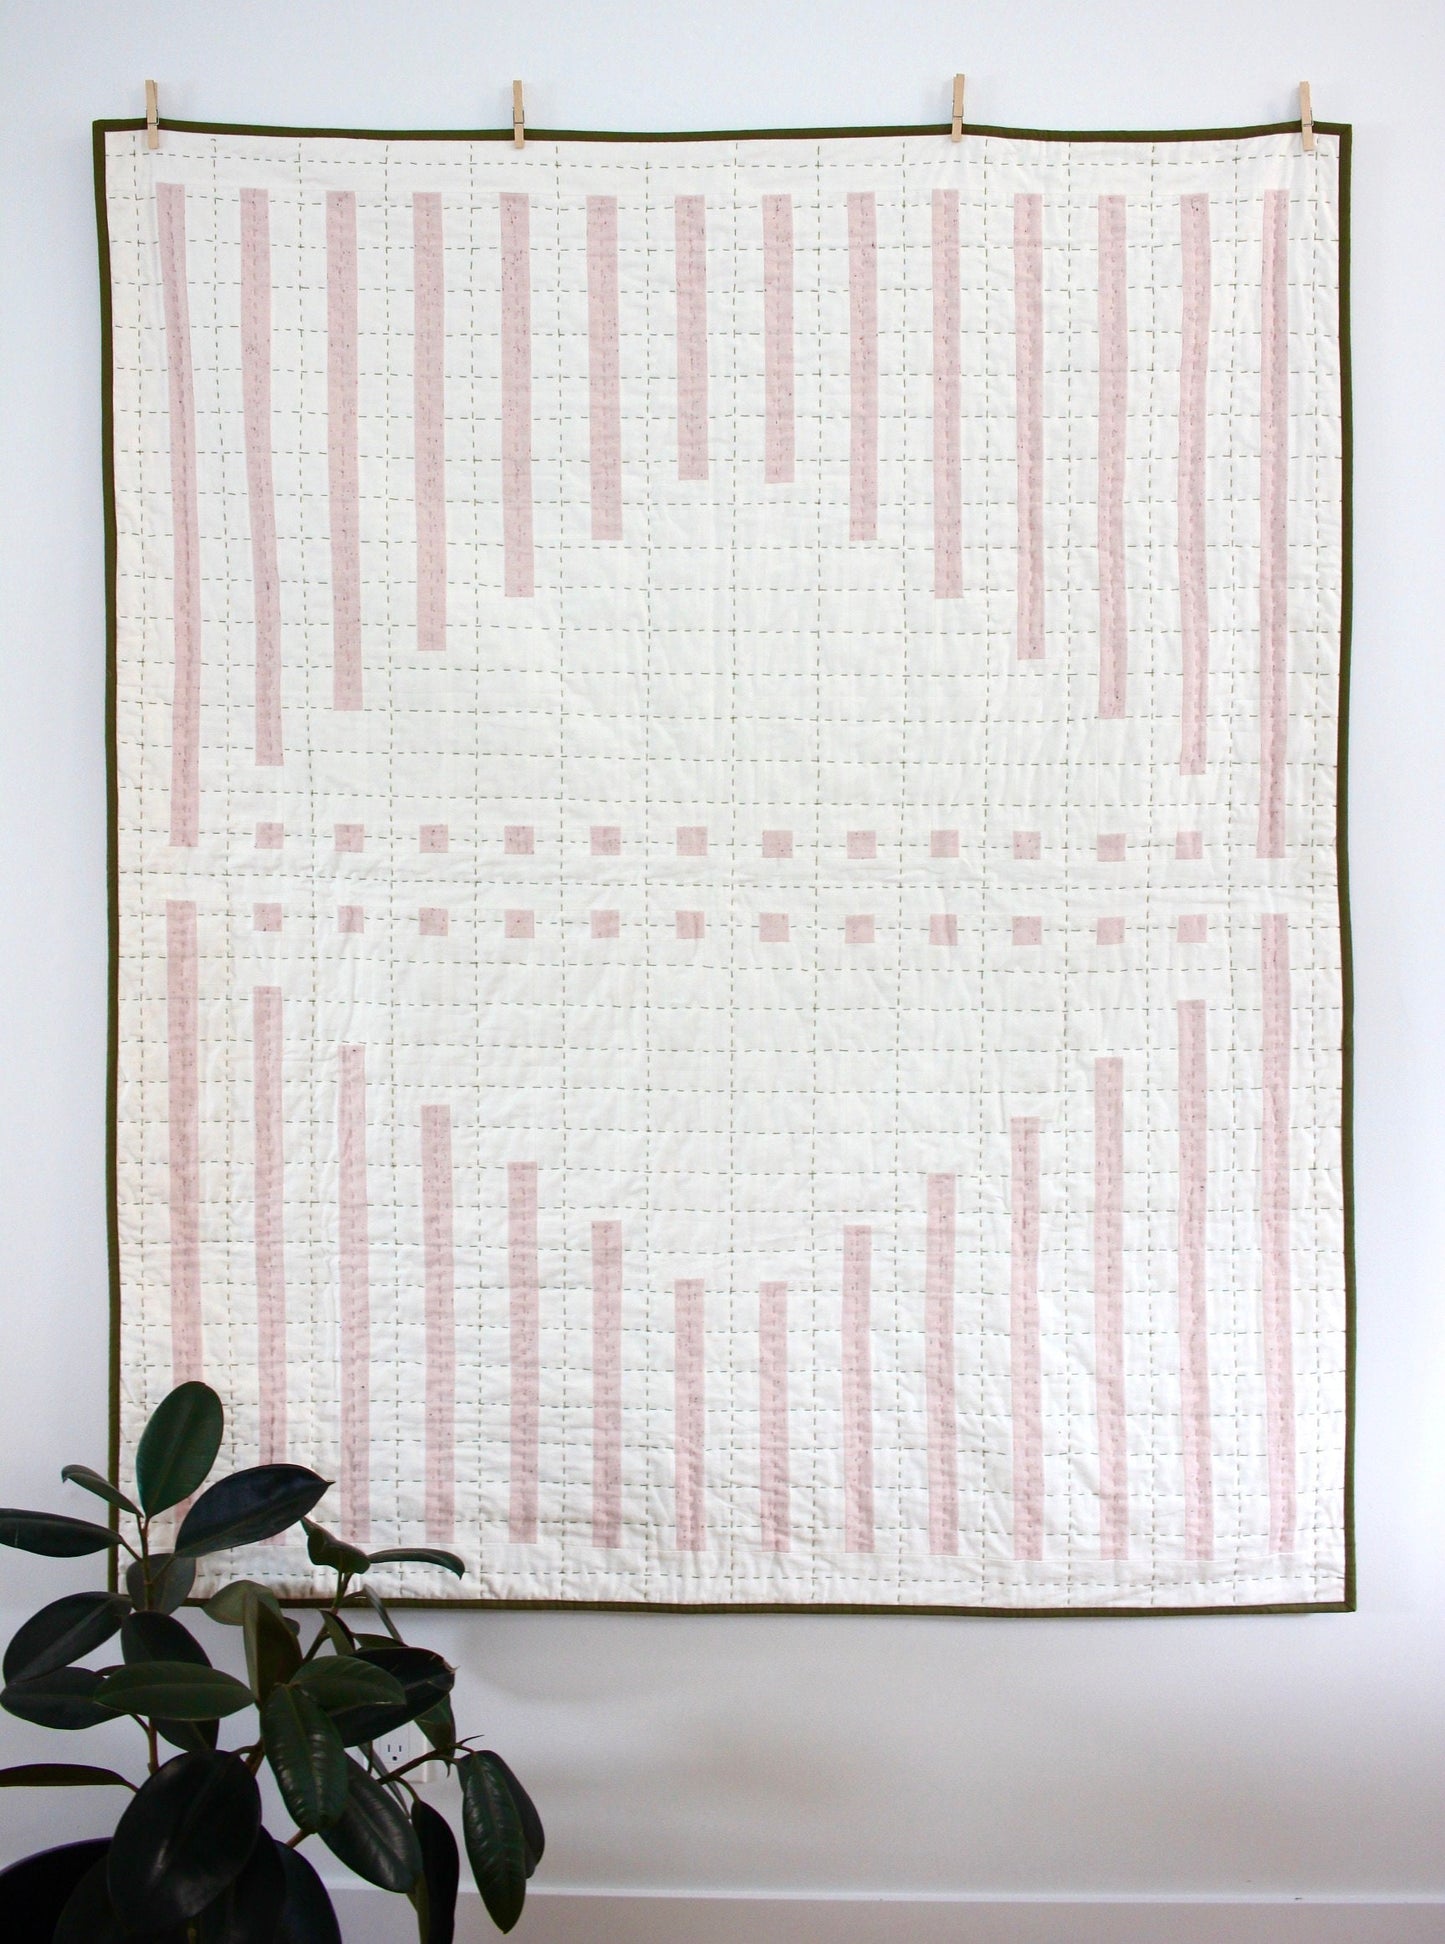 The Rows Quilt PDF Digital Pattern